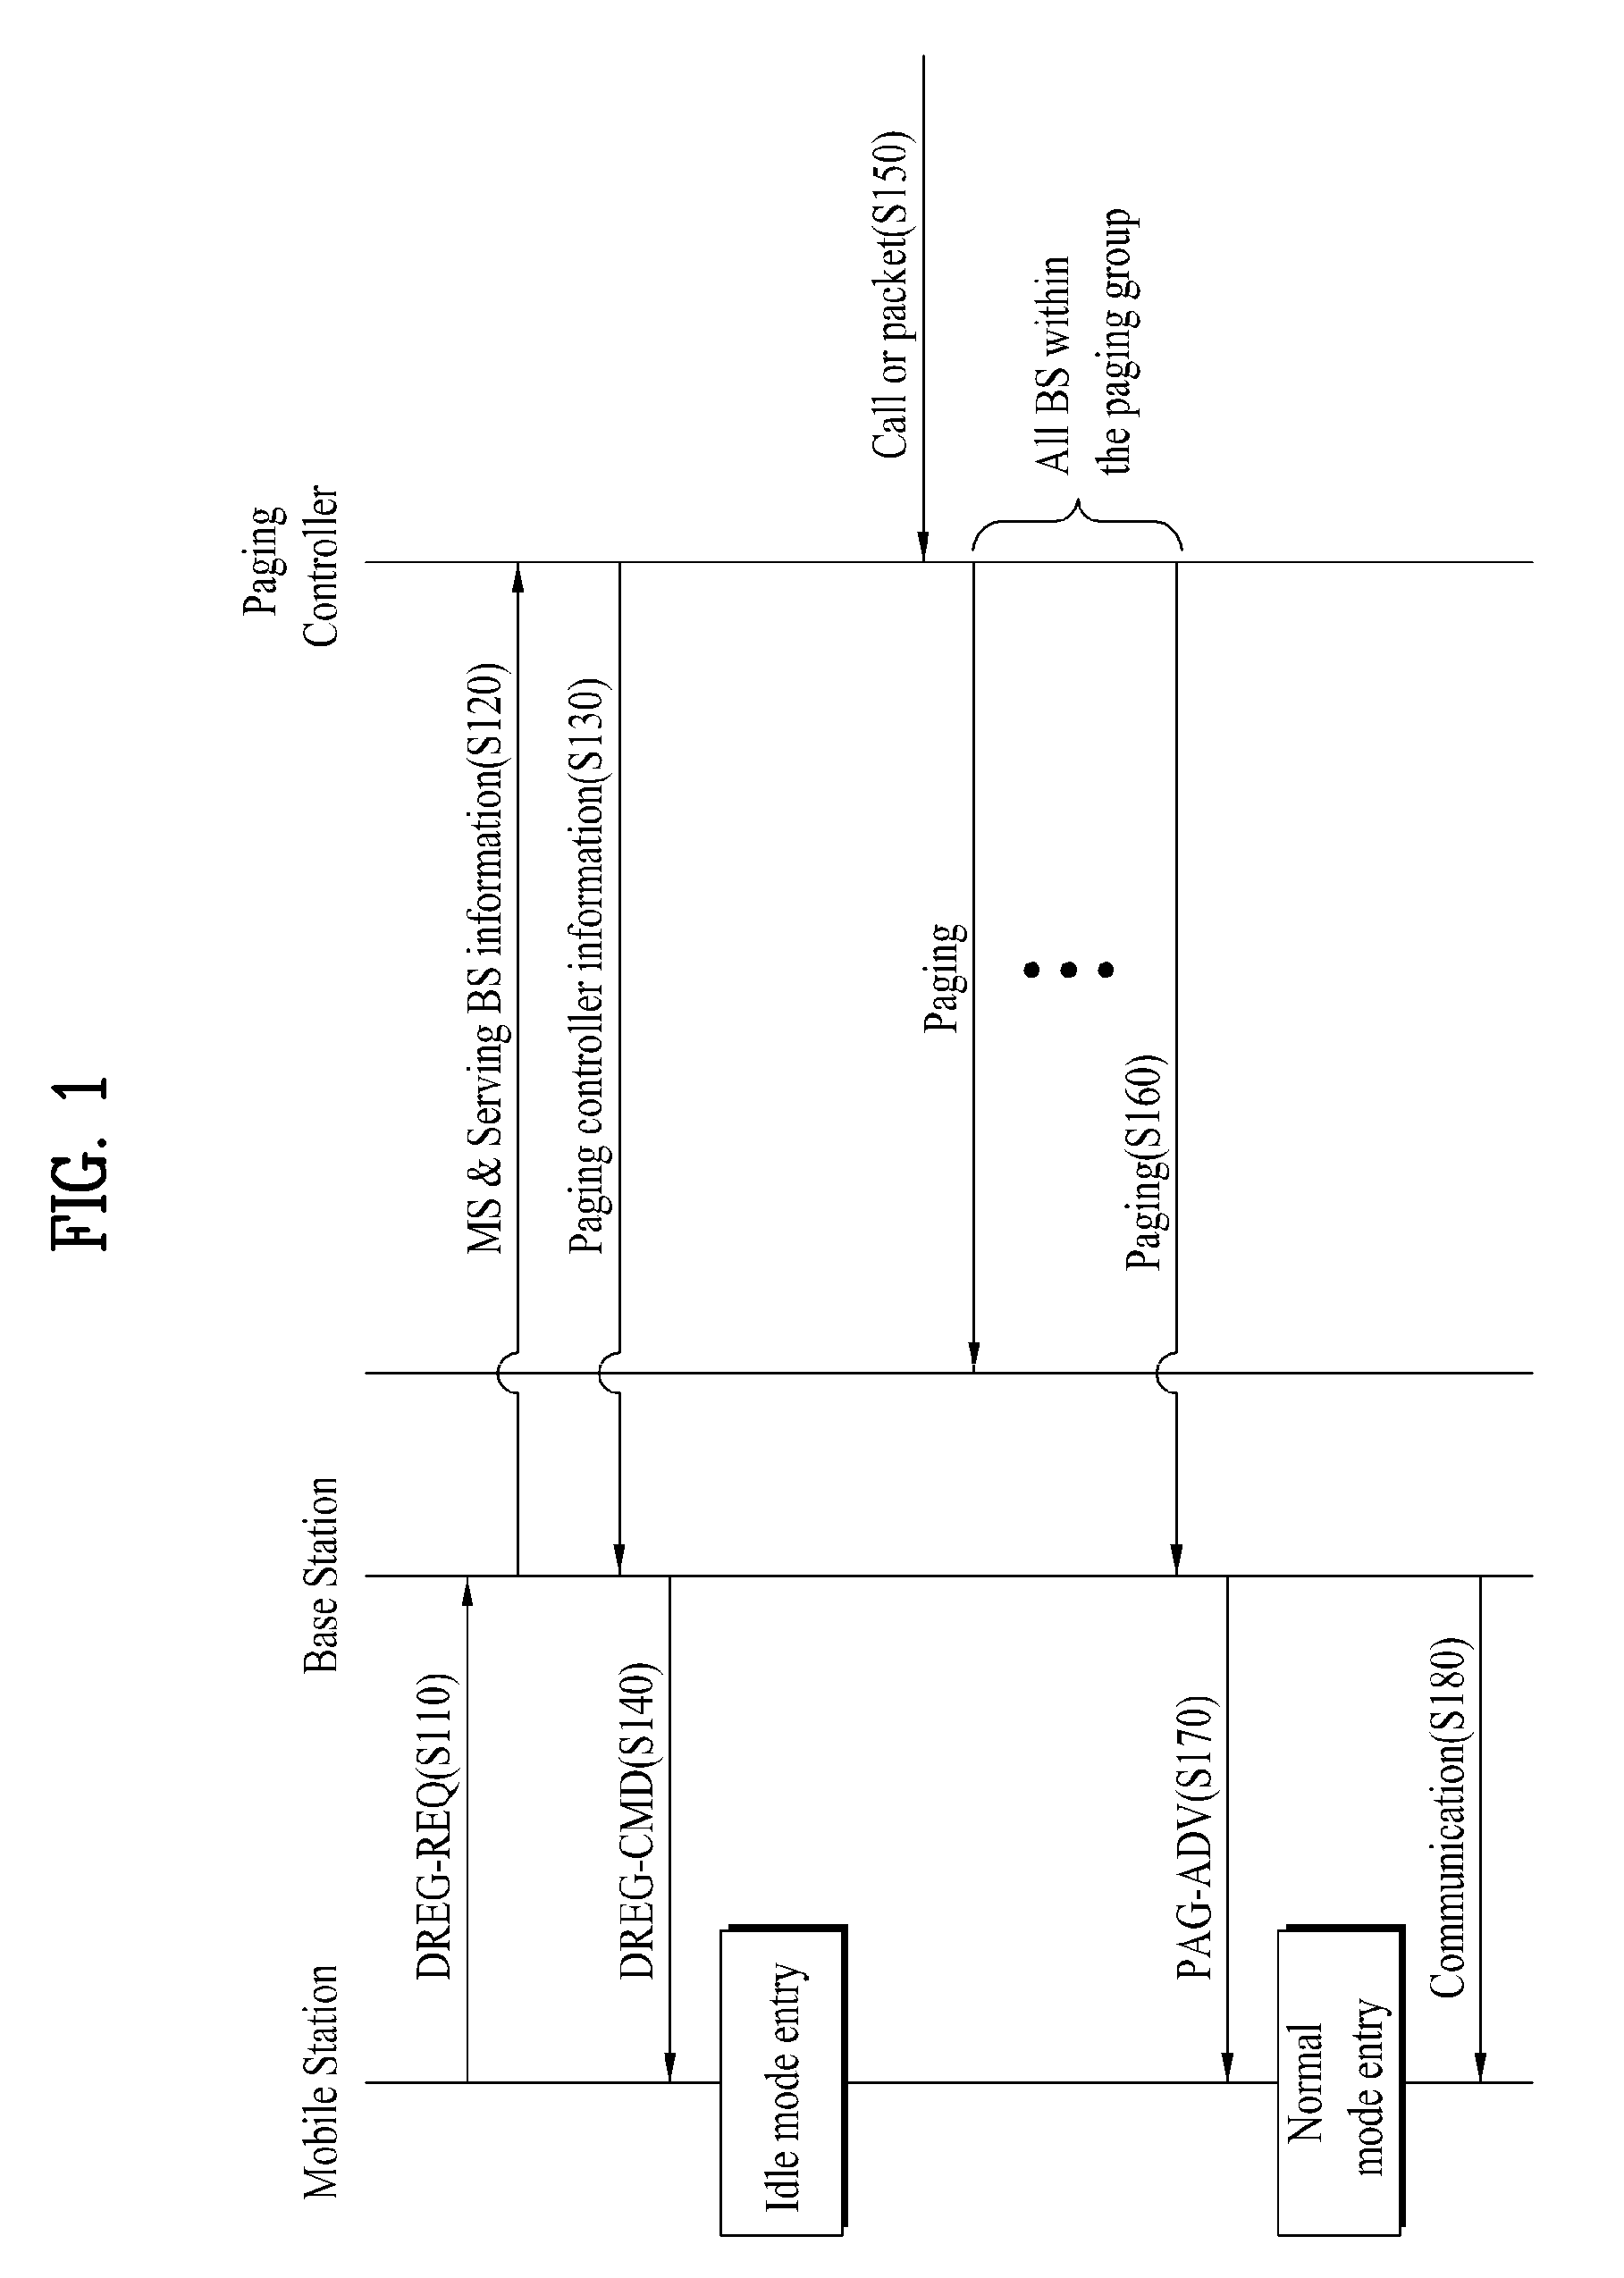 Method of paging in a wireless communication system